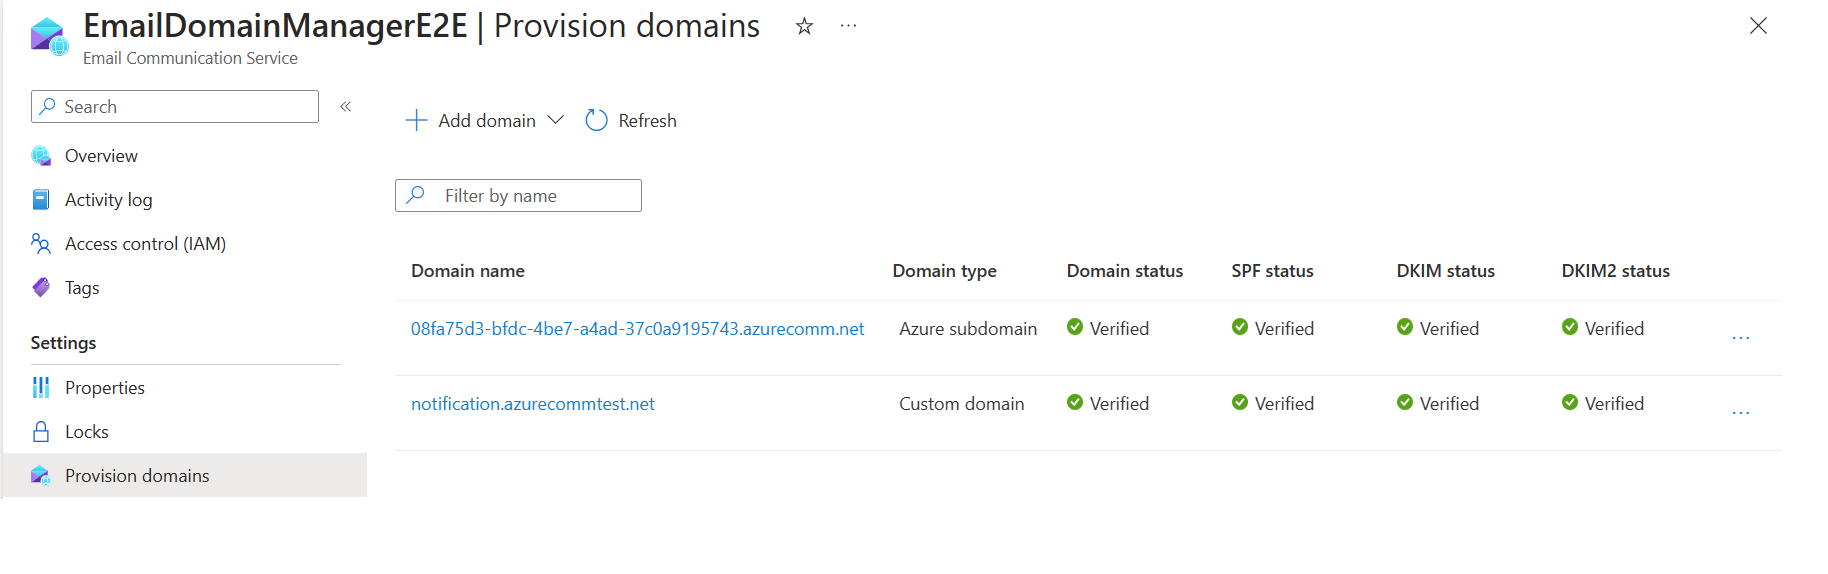 Screenshot that shows Azure Managed Domain link in list of provisioned email domains.